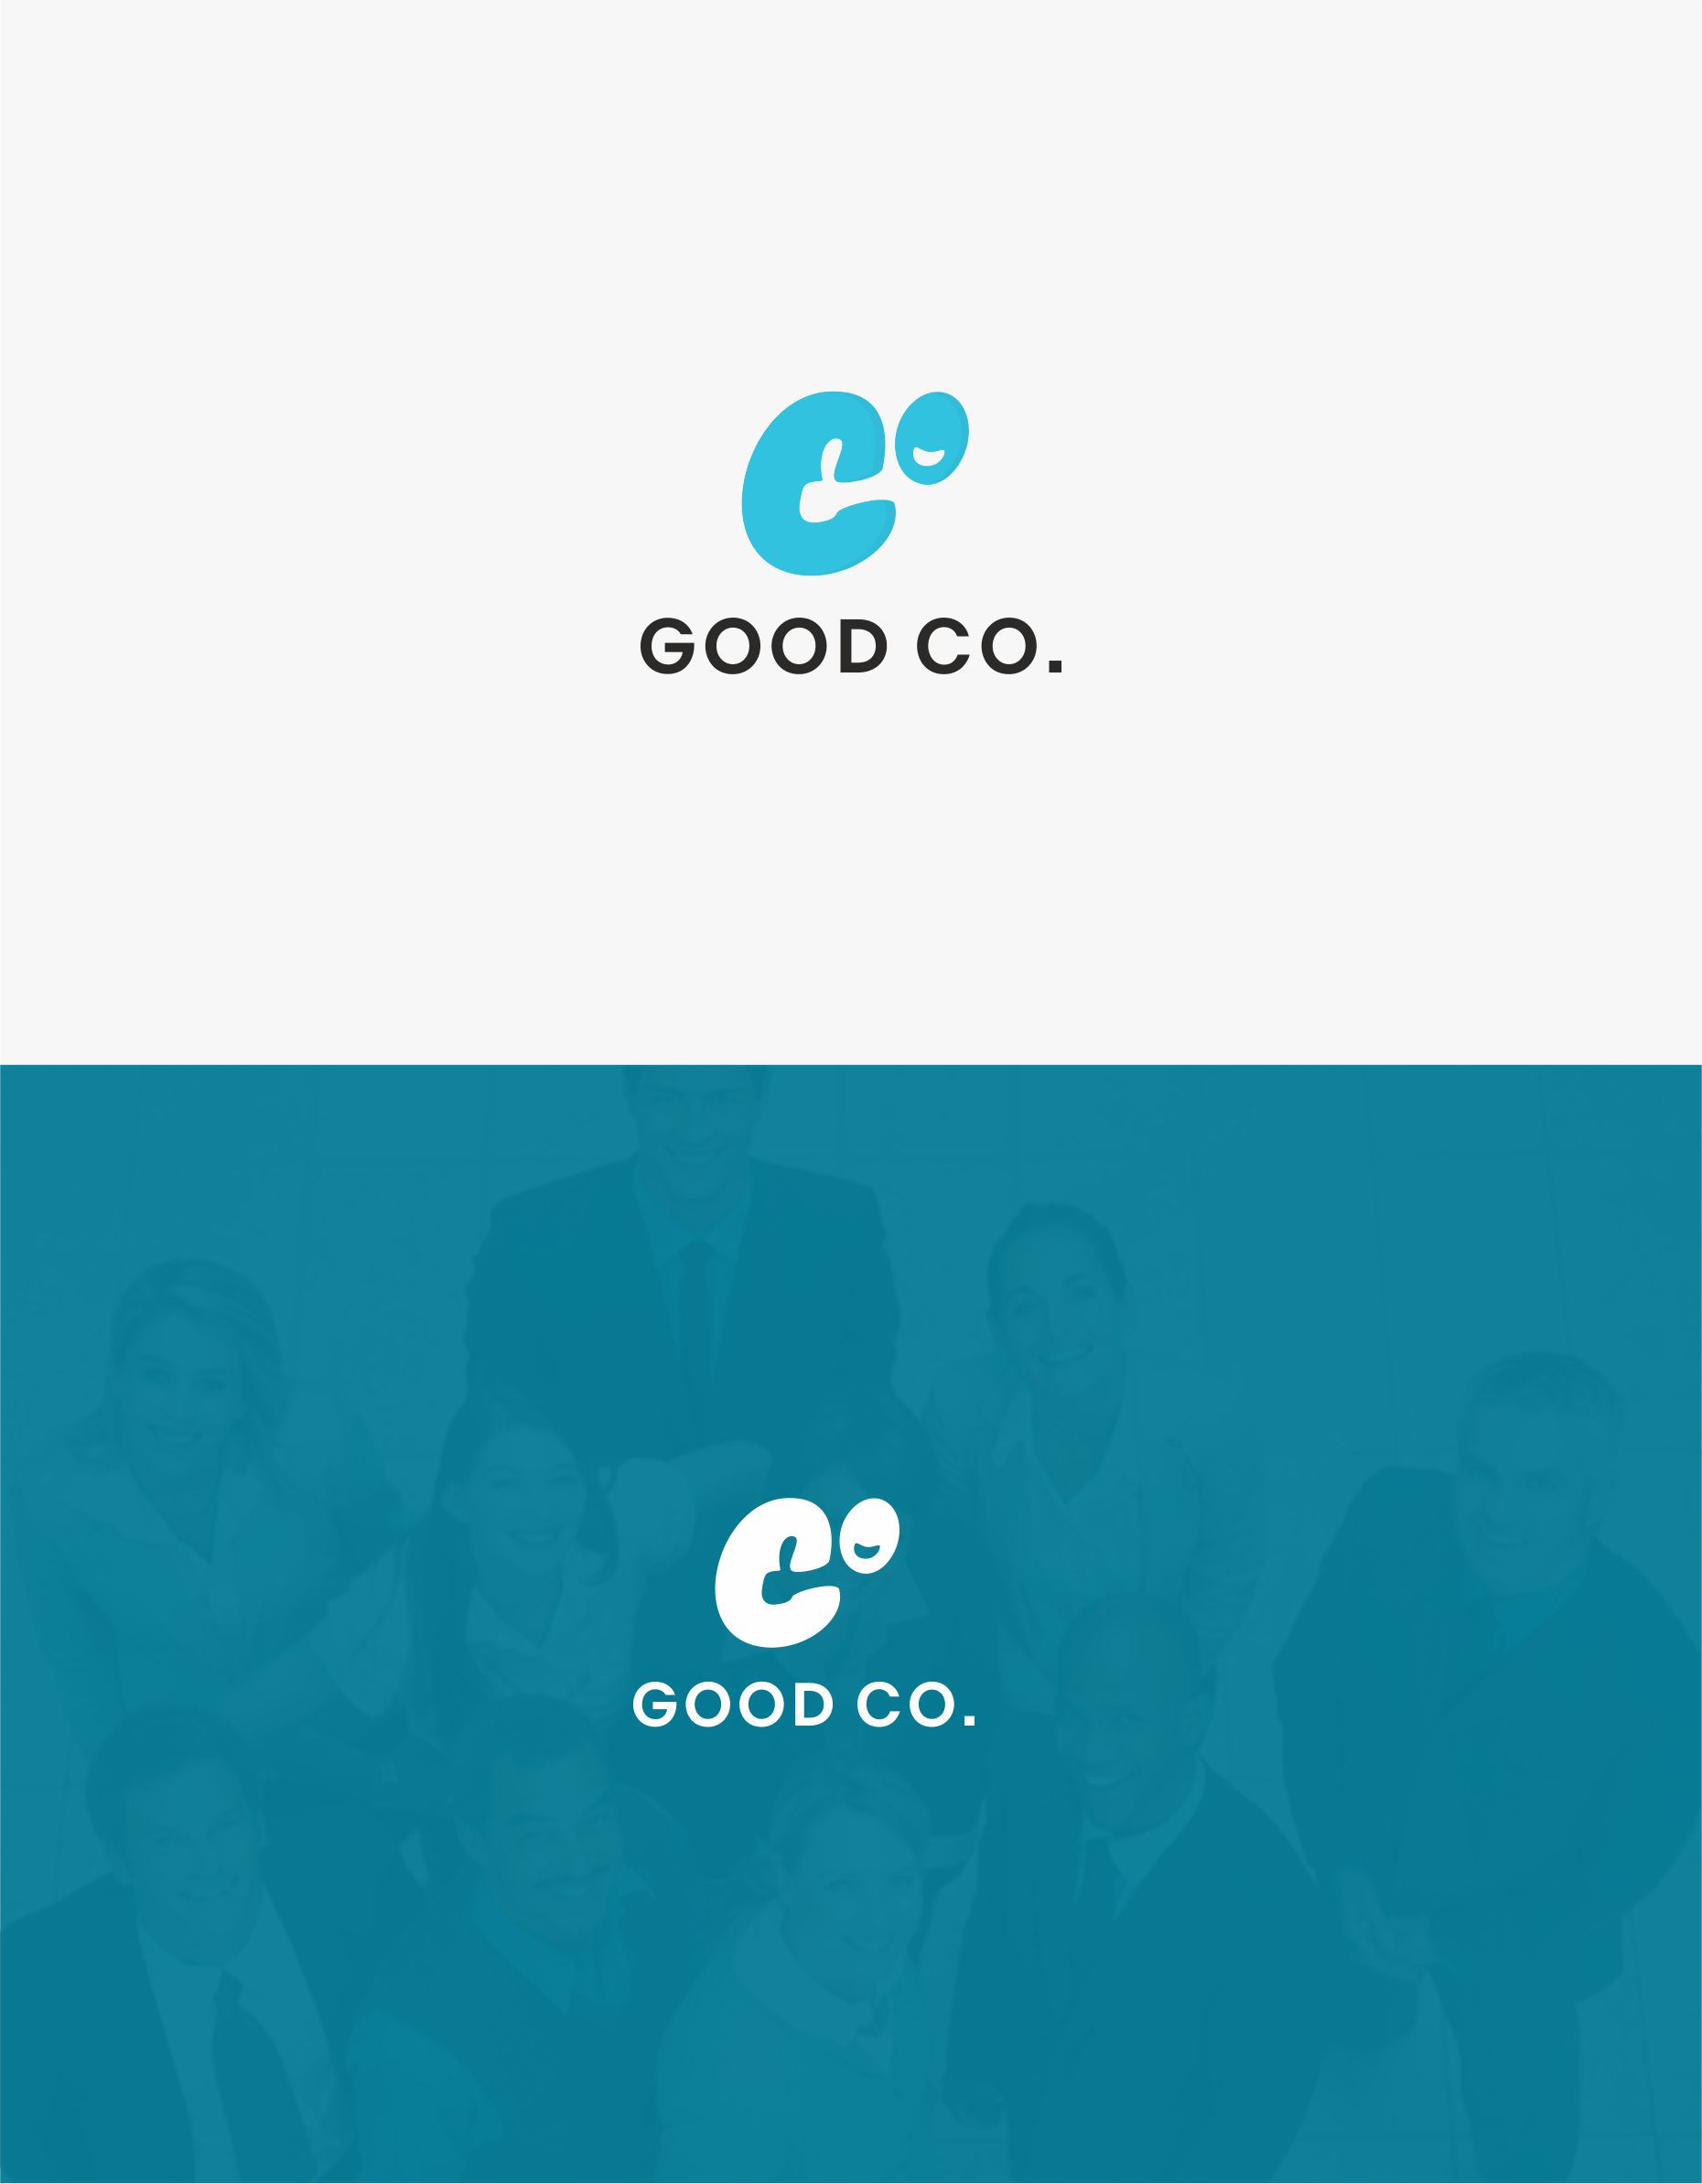 Cool Small Logo - Messages. Create a cool ass logo for a small company that has big